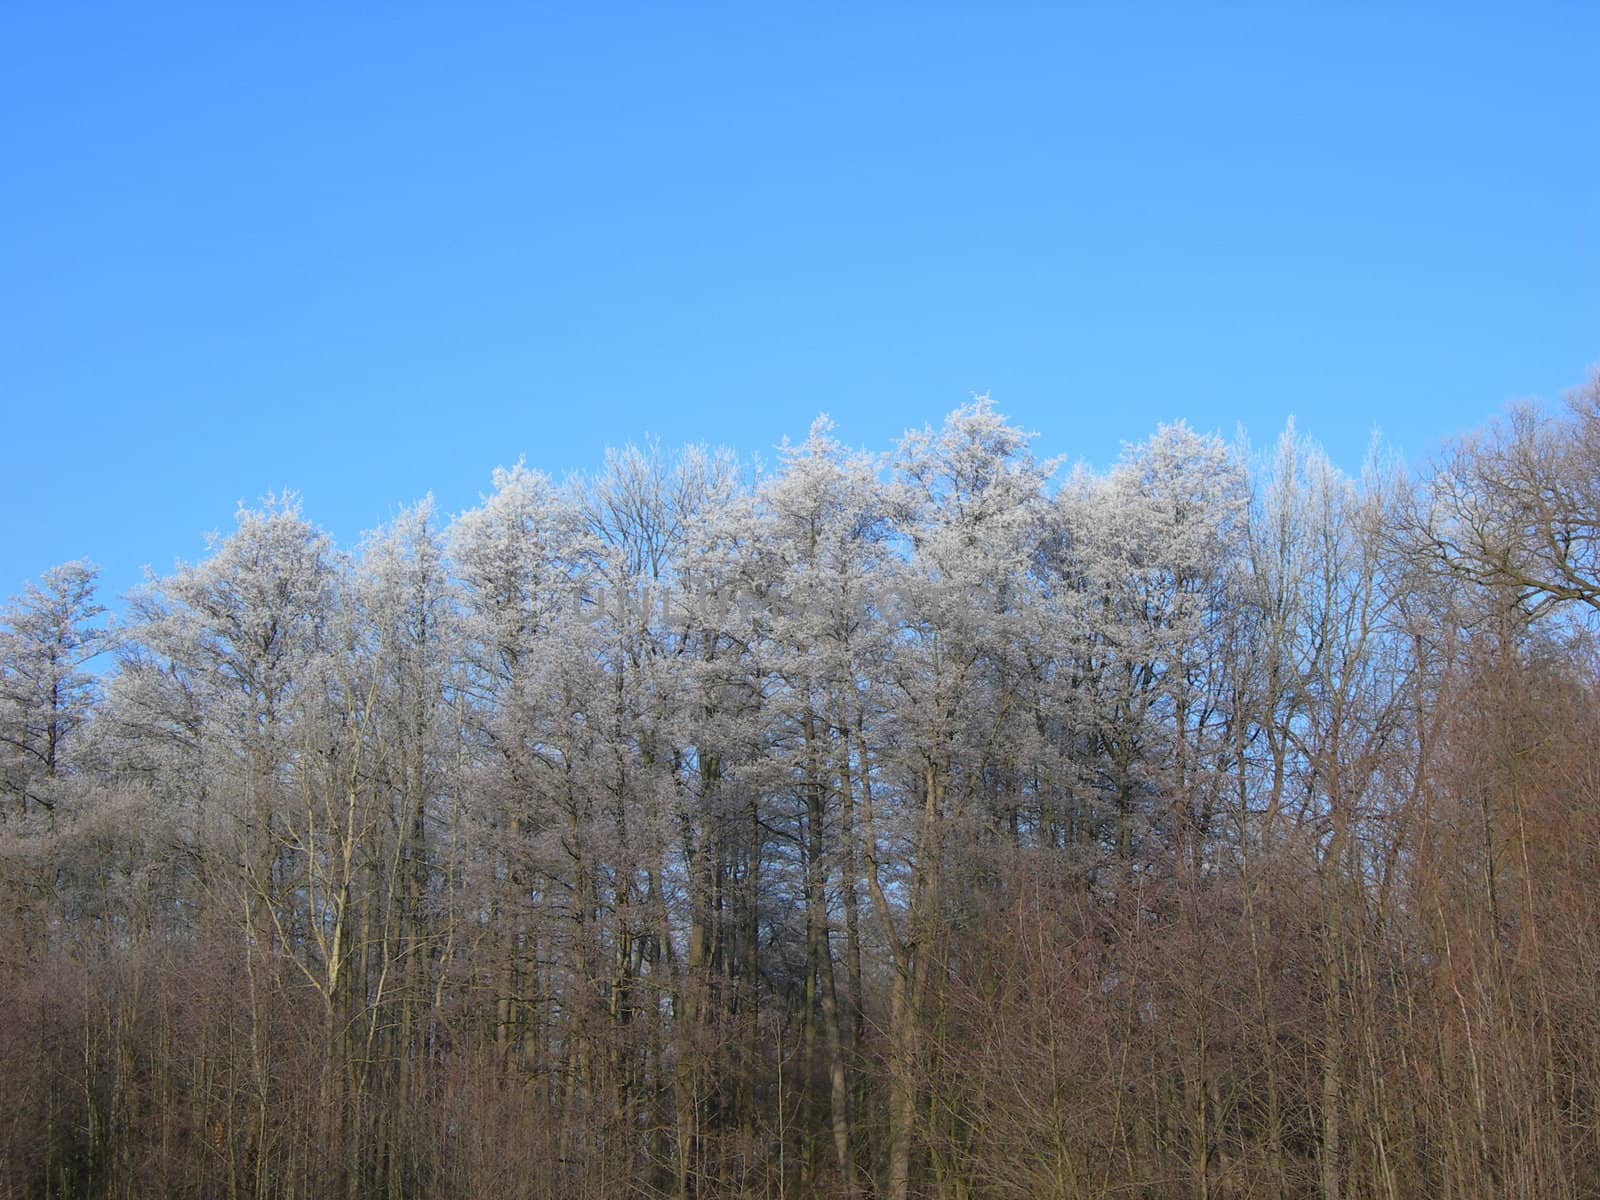           Forest in winter. Trees are heavily covered by snow.     